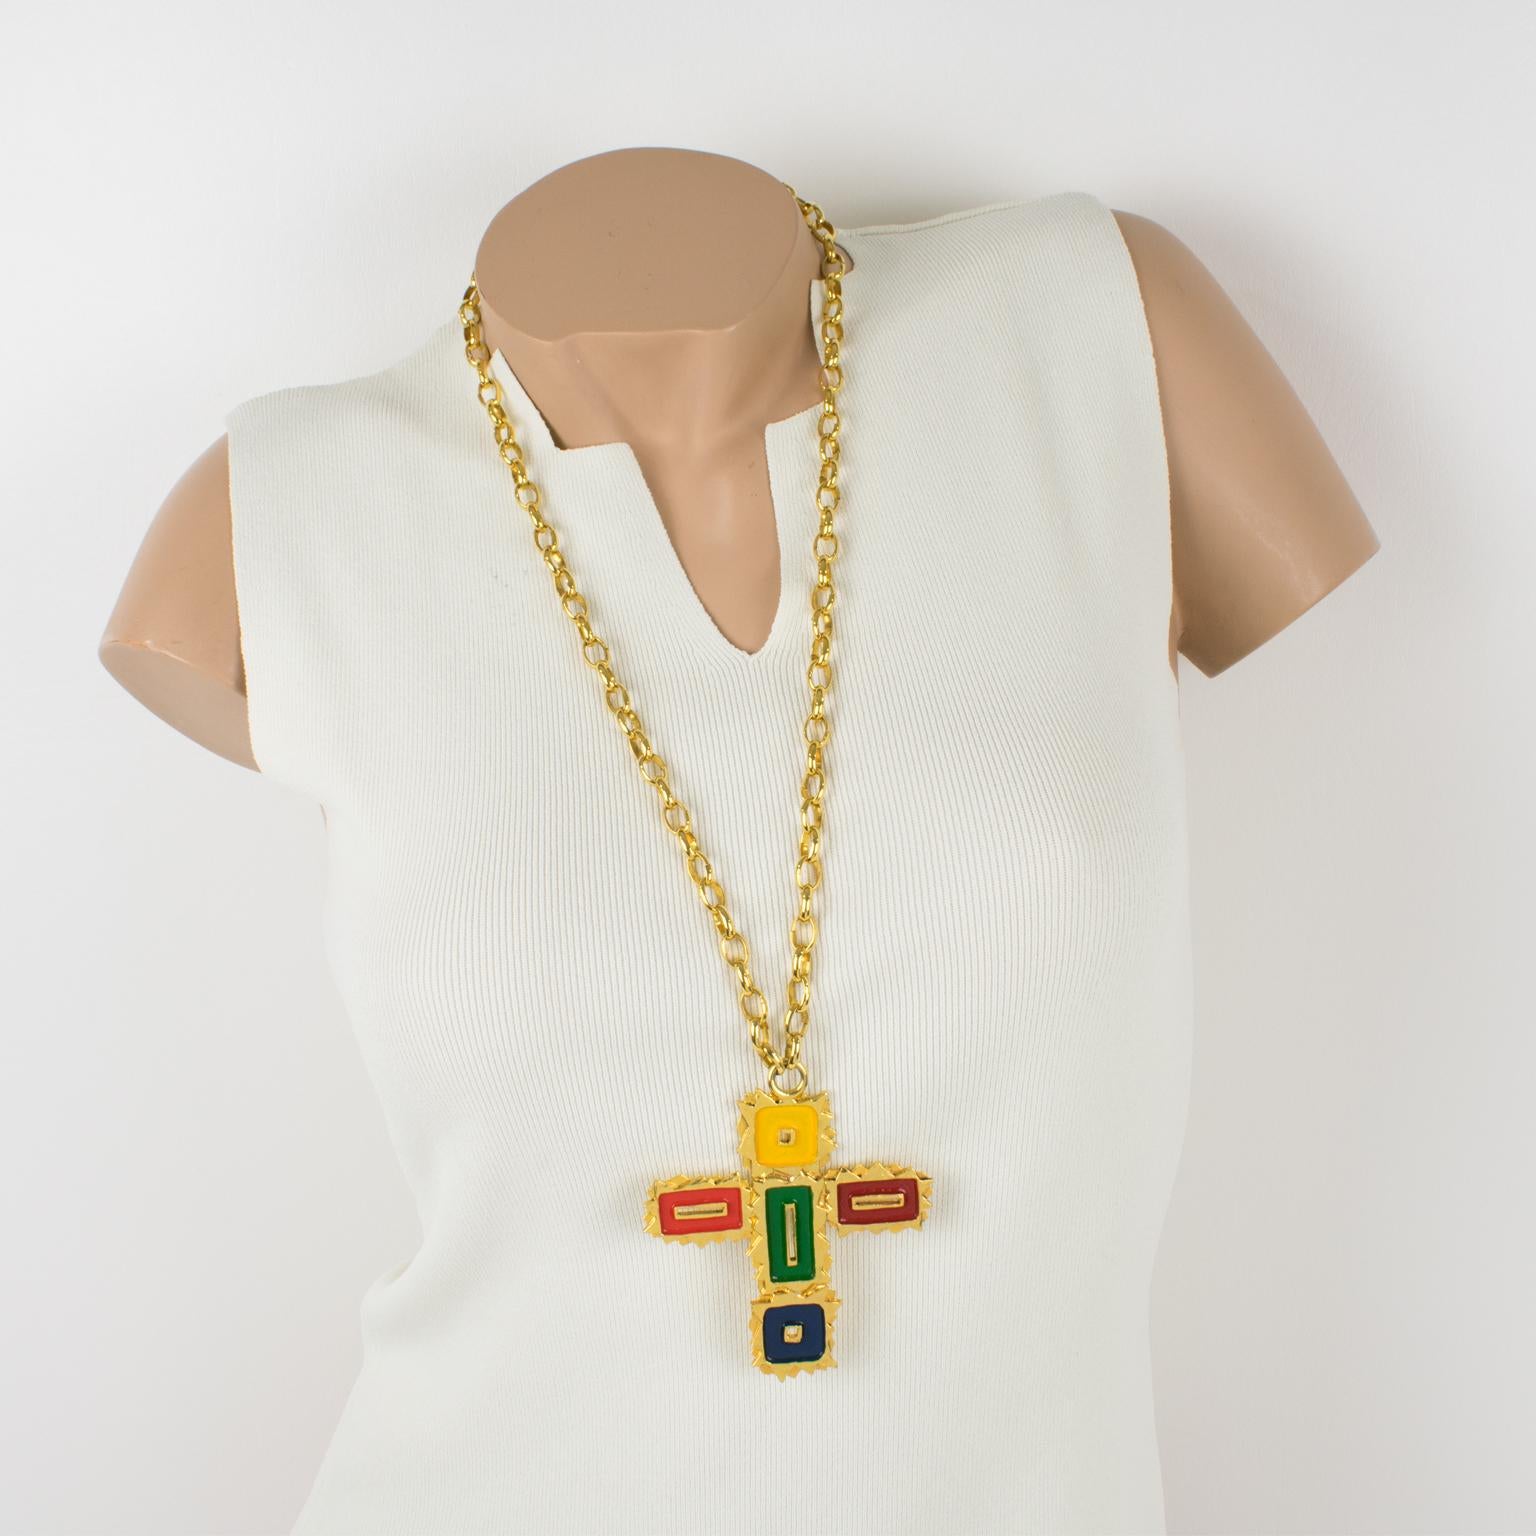 This gorgeous Mercedes Robirosa Paris couture pendant necklace features an oversized gilt metal all-textured and pierced cross pendant ornate with enamel in red, green, blue, and yellow colors. The heavy gilded metal chain has a hook closing clasp